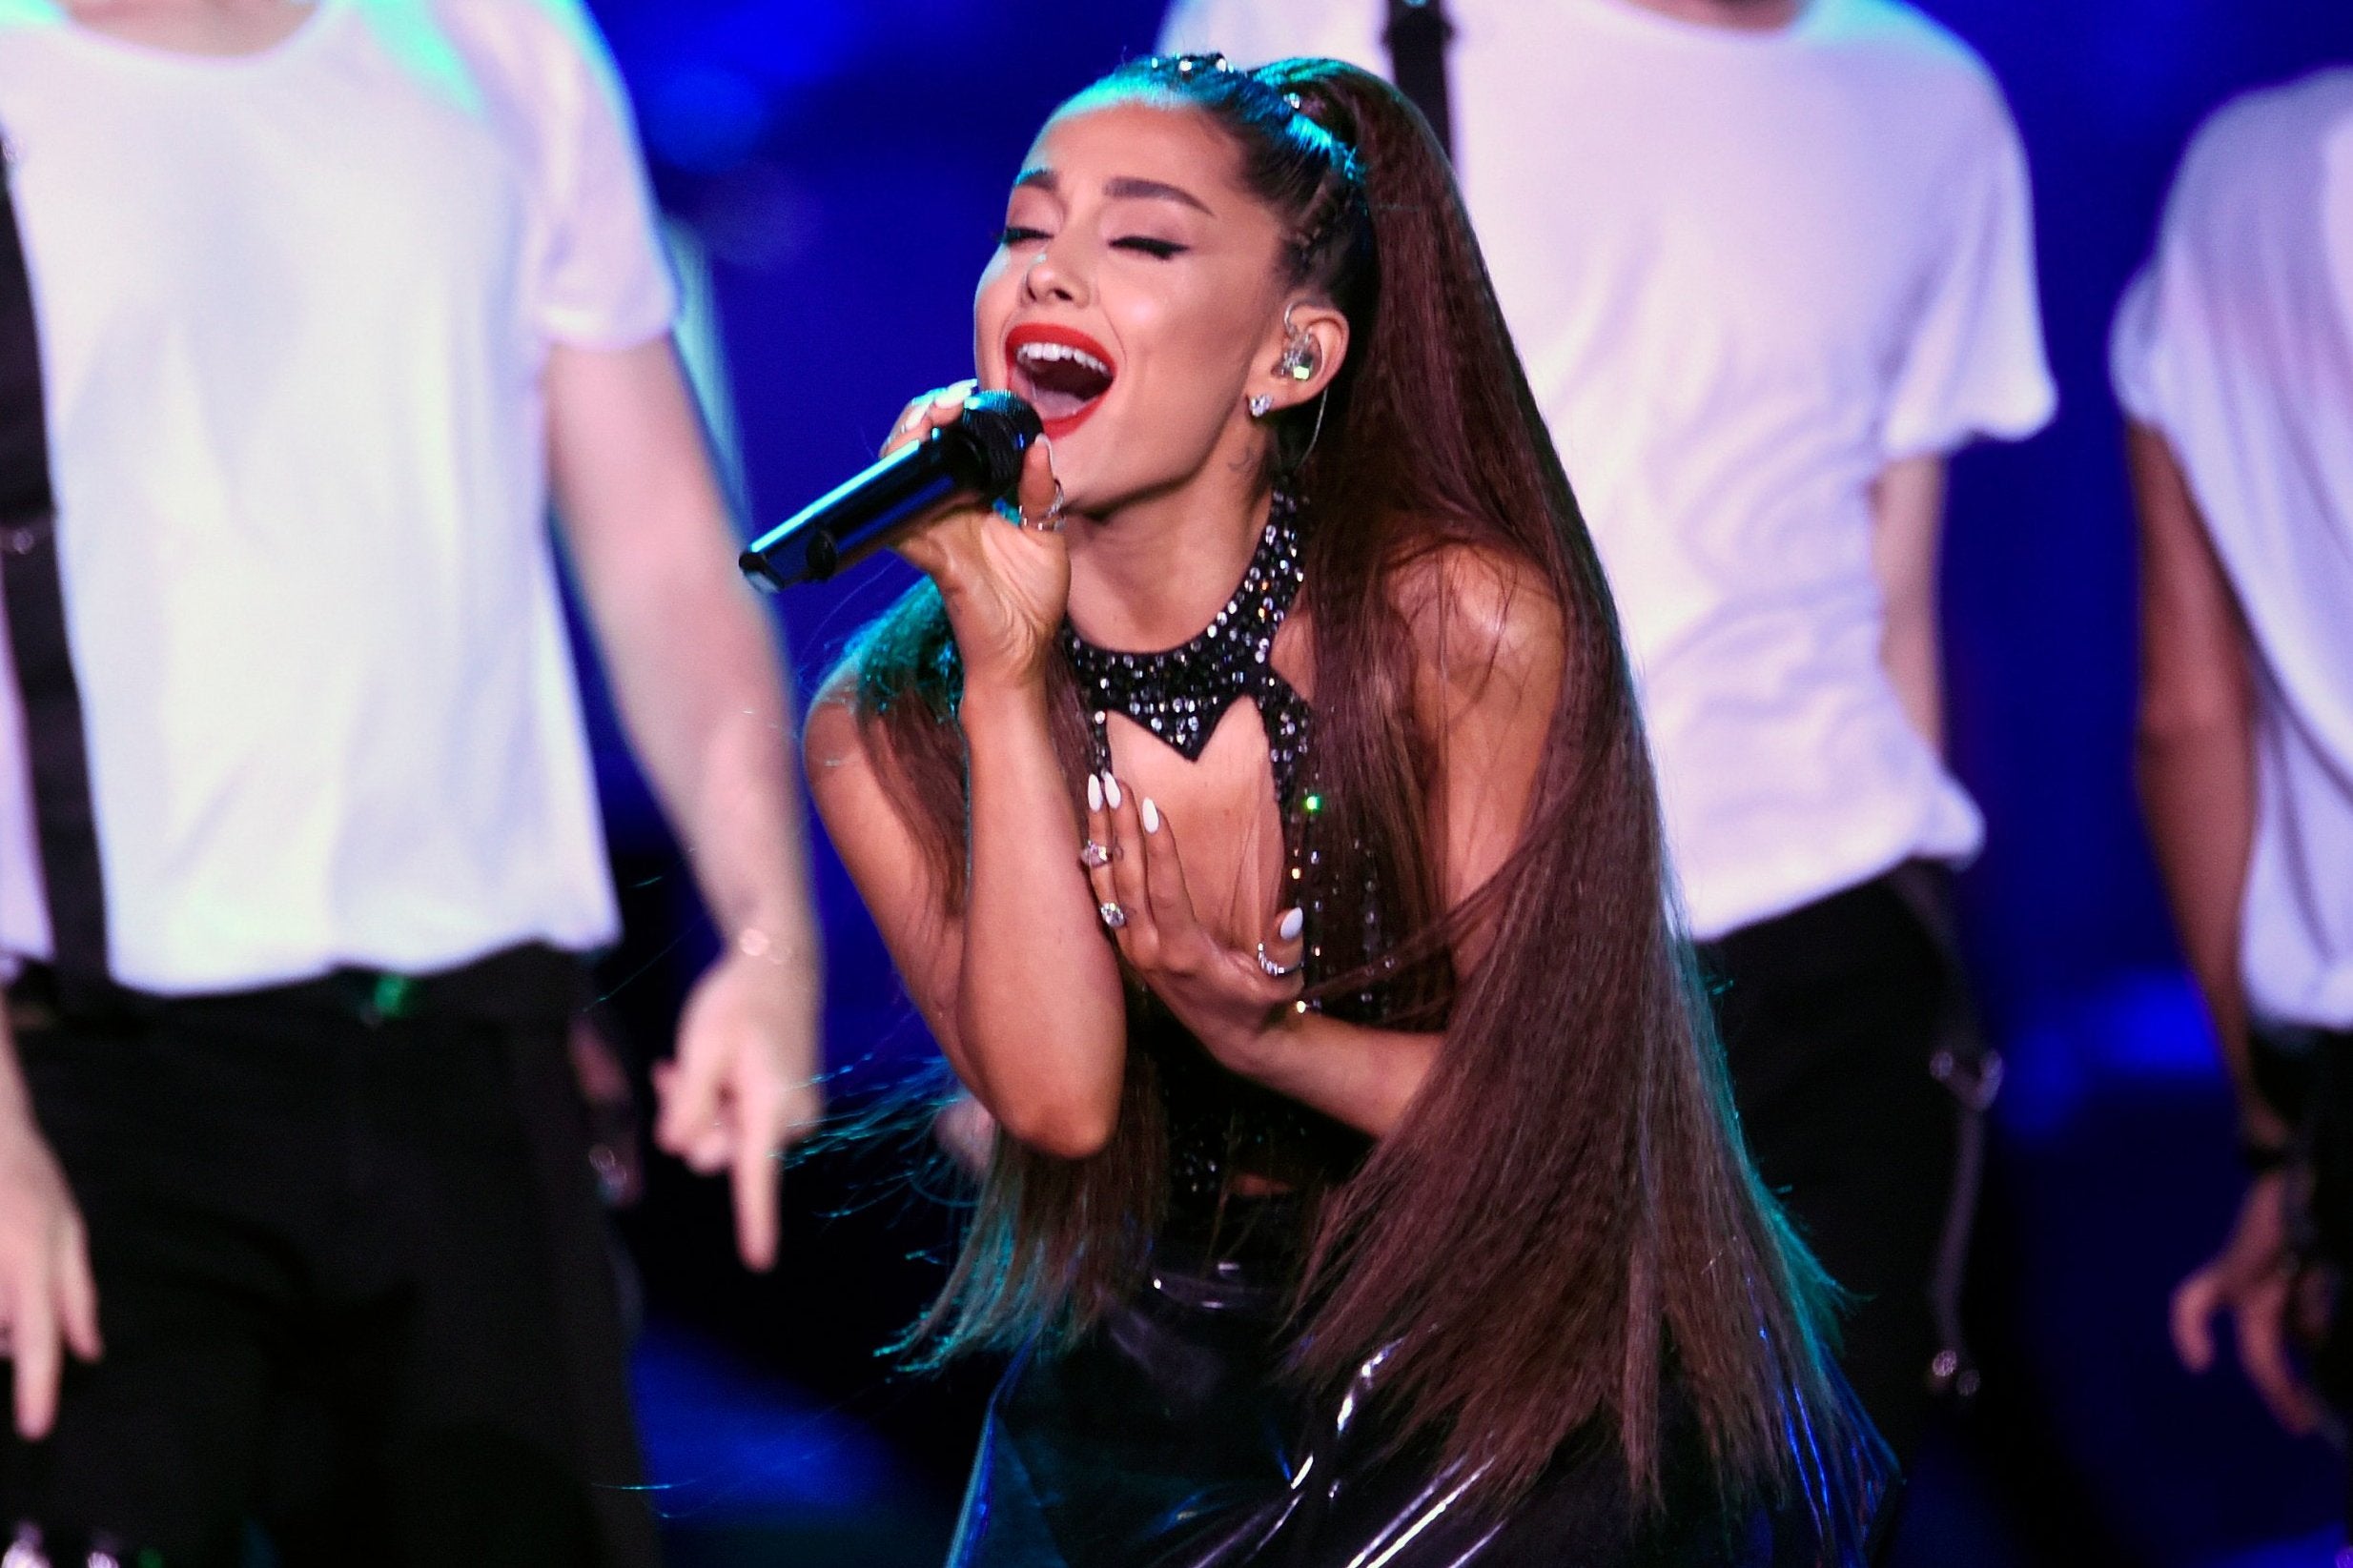 Ariana Grande has revealed her debut performance of 'thank u, next' will be on The Ellen DeGeneres Show